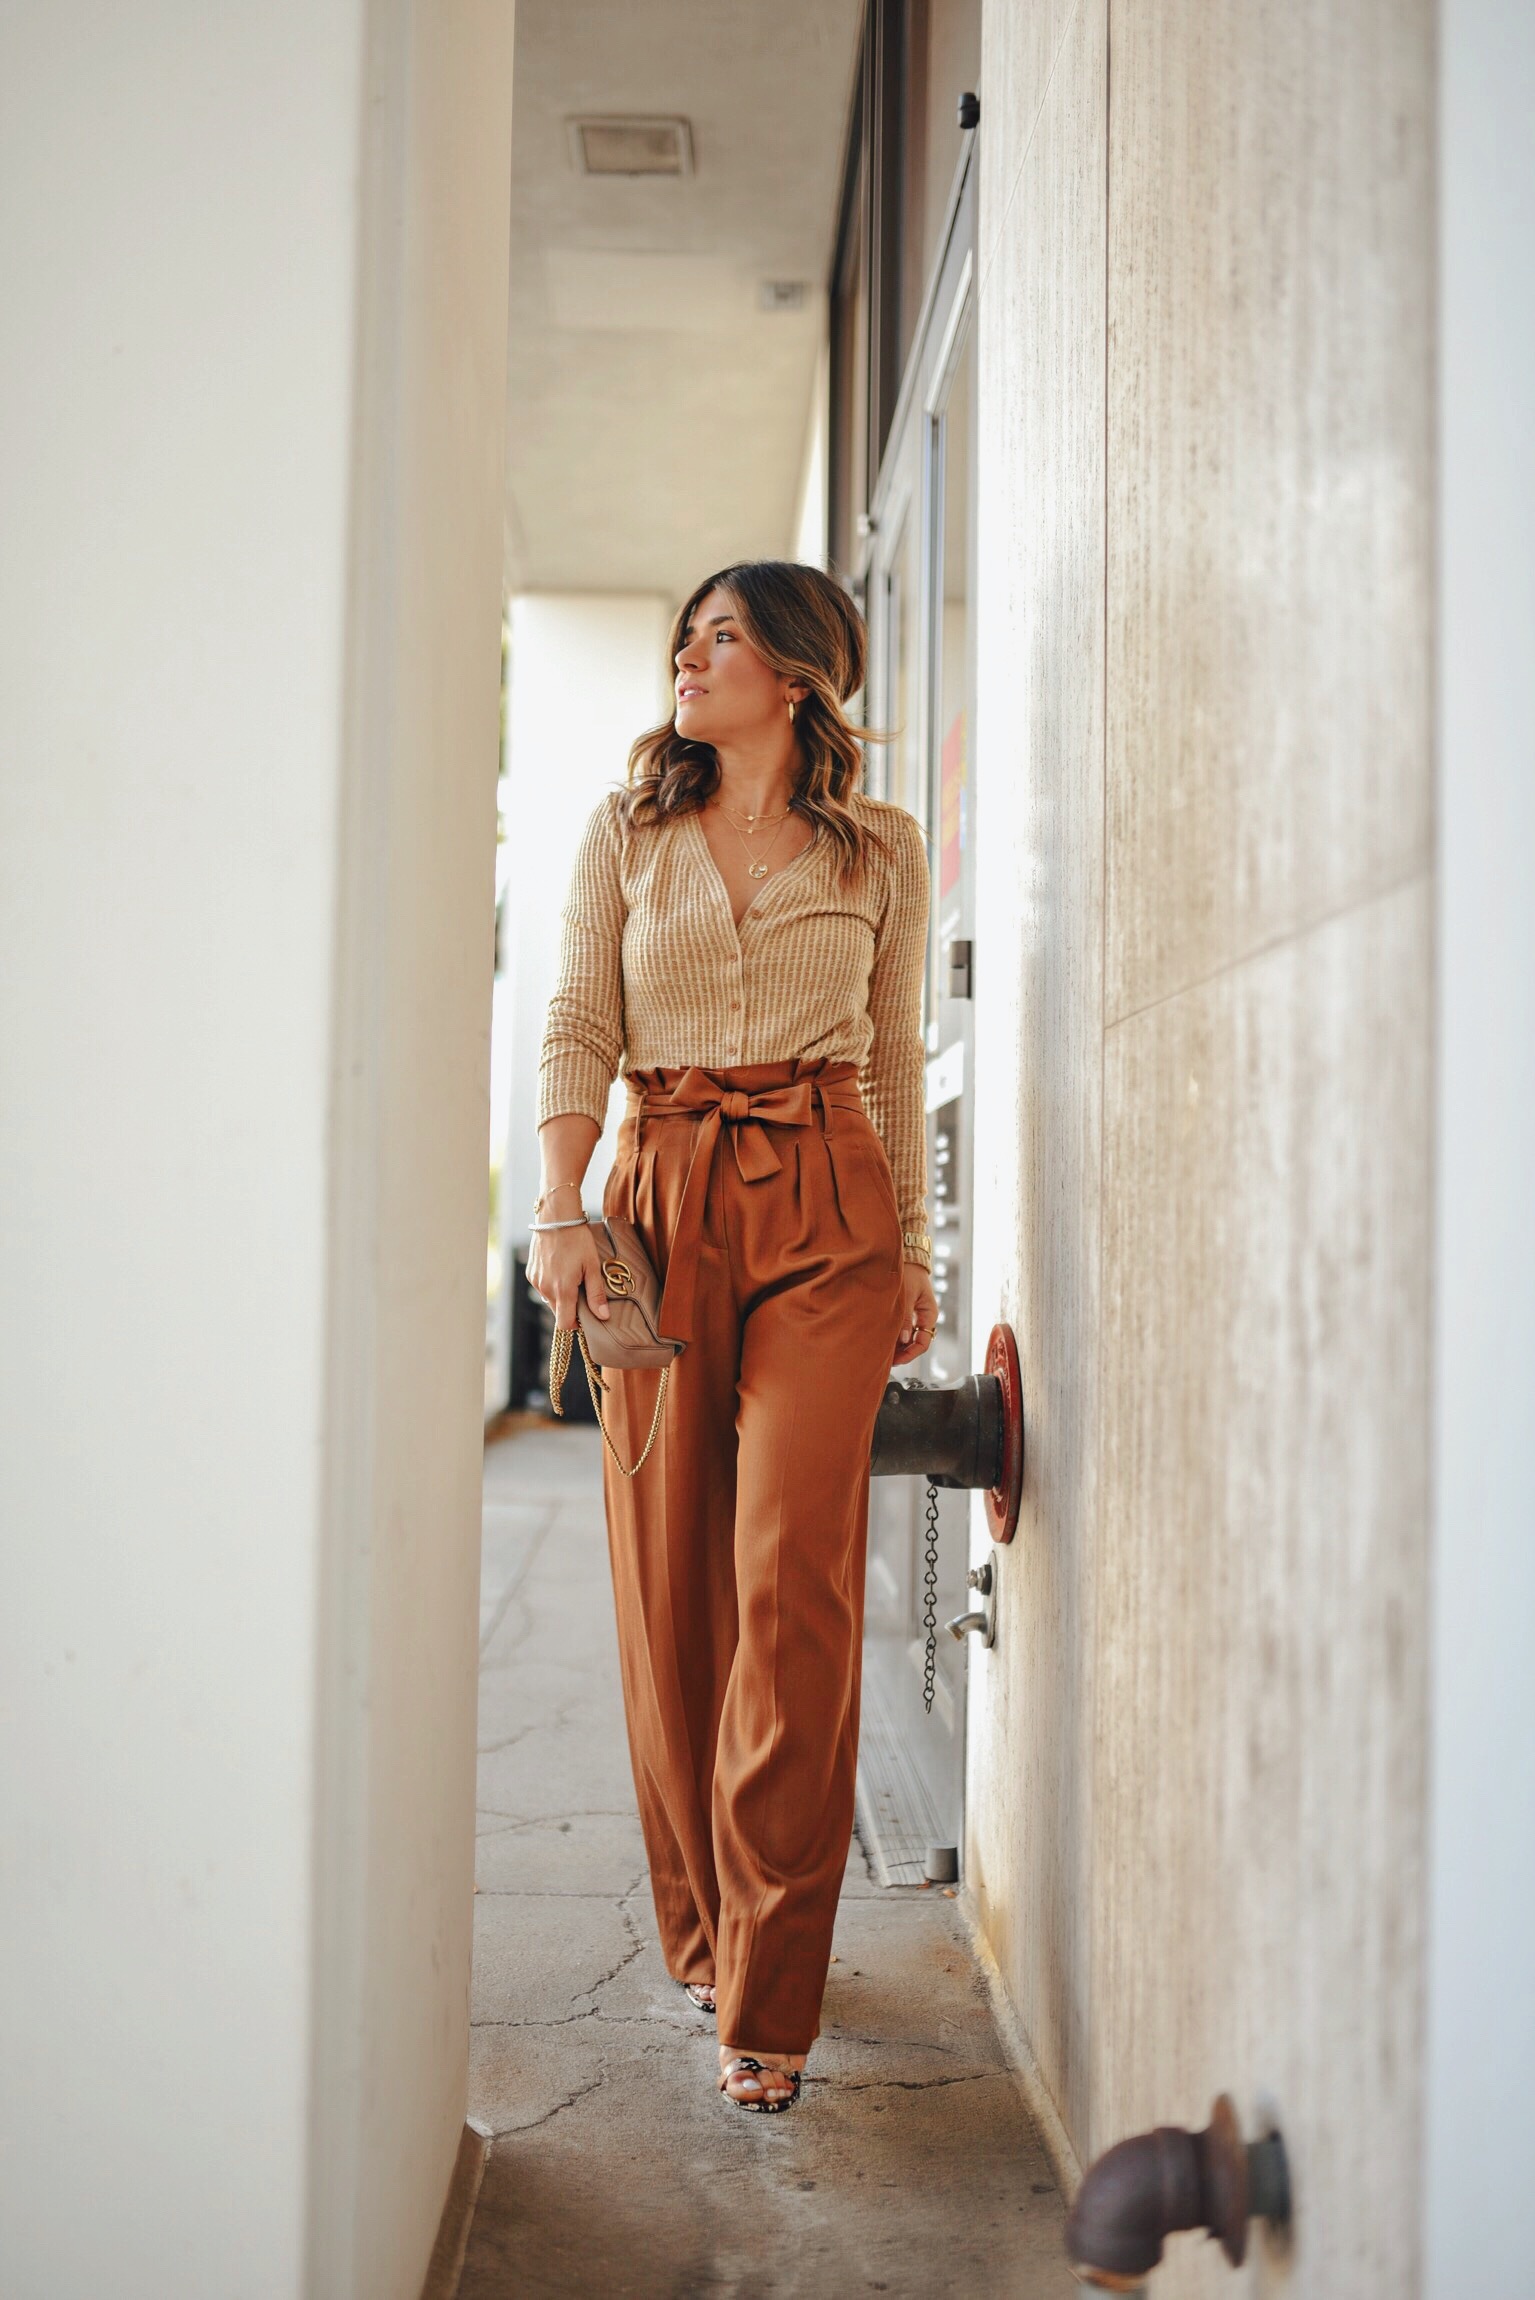 Carolina Hellal of Chic Talk wearing a sweater from the Nordstrom Anniversary Sale, Gucci bag and Sezane high waist pants.